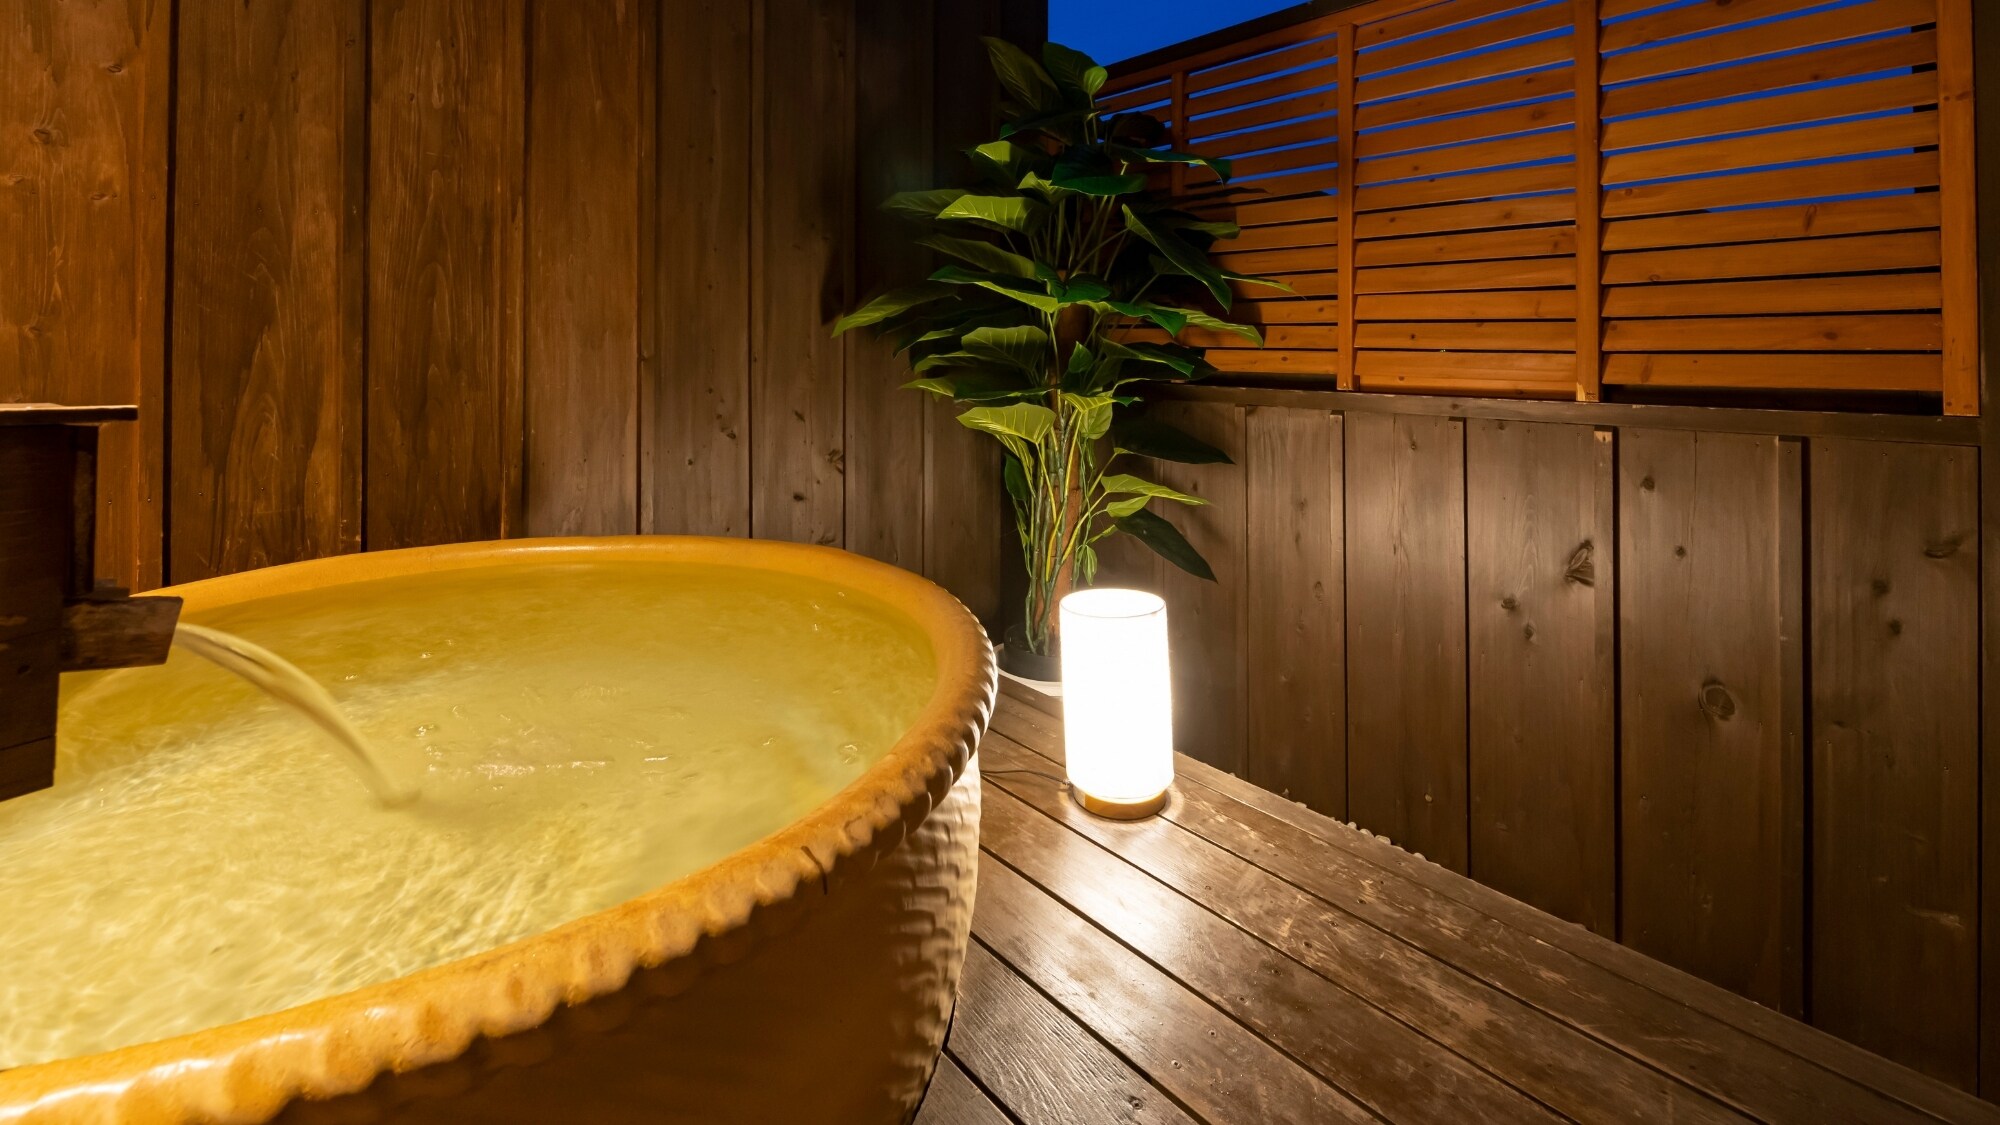 Please spend quality time in the guest room with an open-air bath.